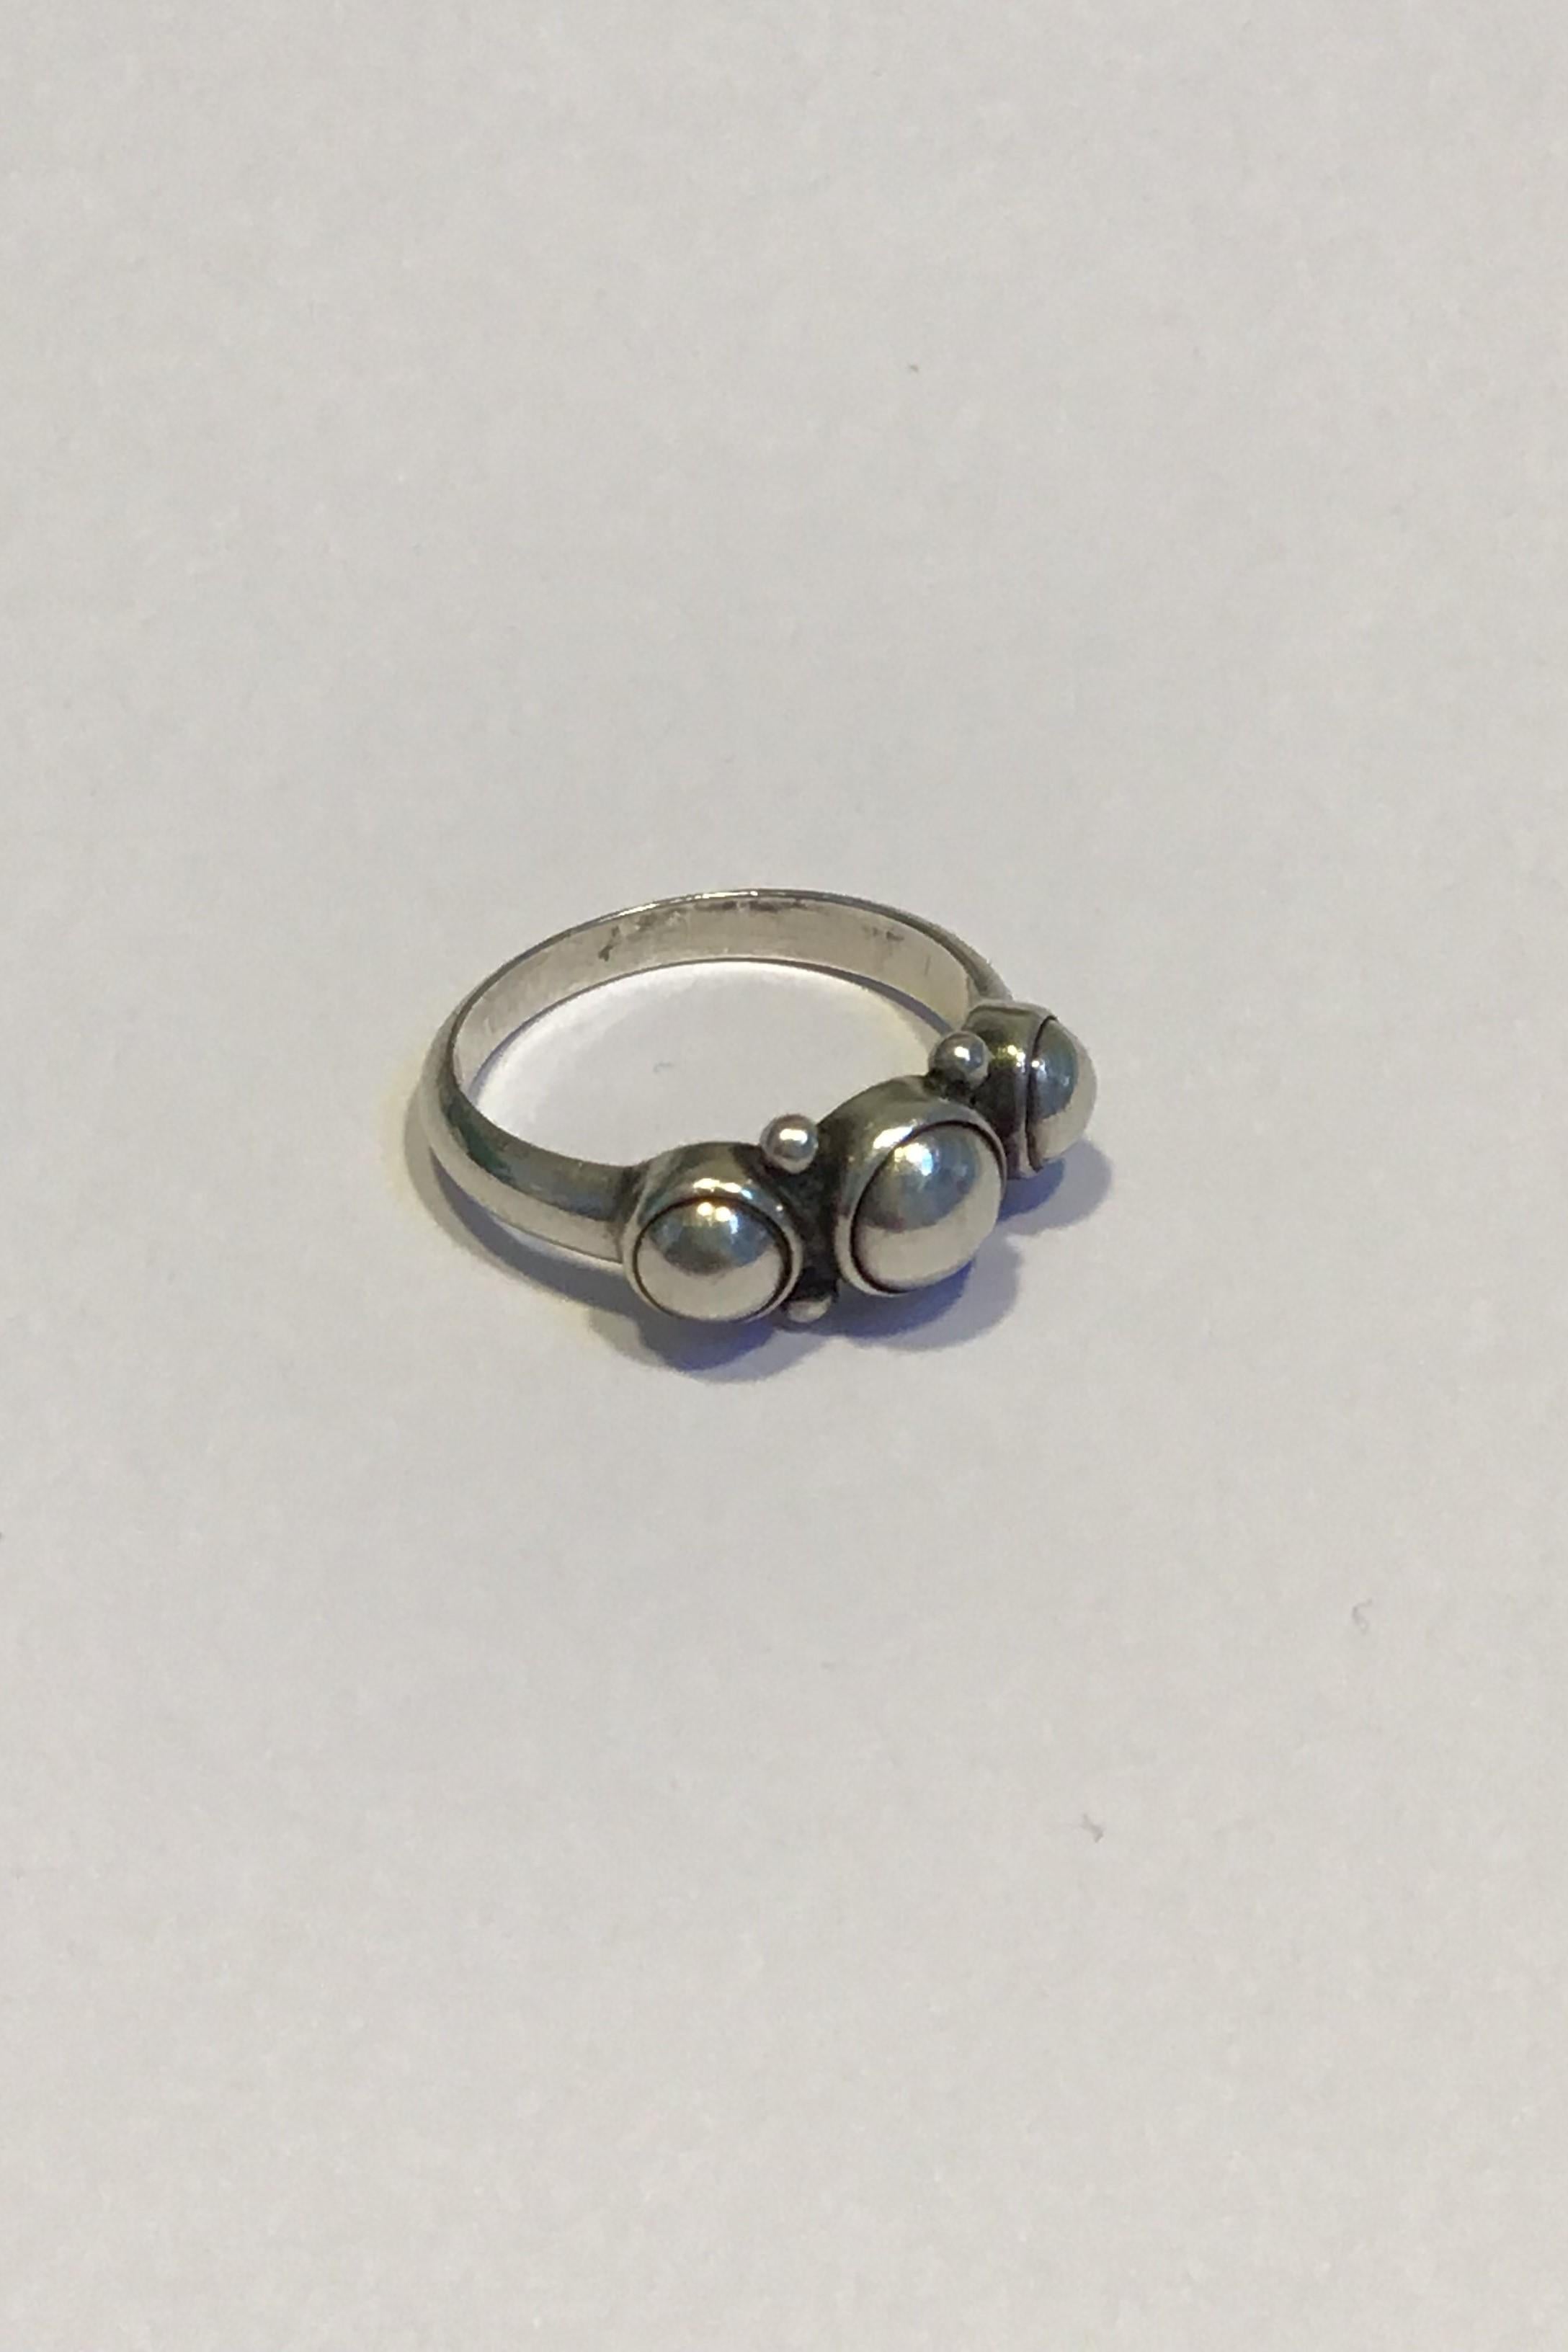 Georg Jensen Sterling Silver Ring No 3. Made 1930 - 1945. Ring size 52/US6. Weight 3 g./0.10oz.